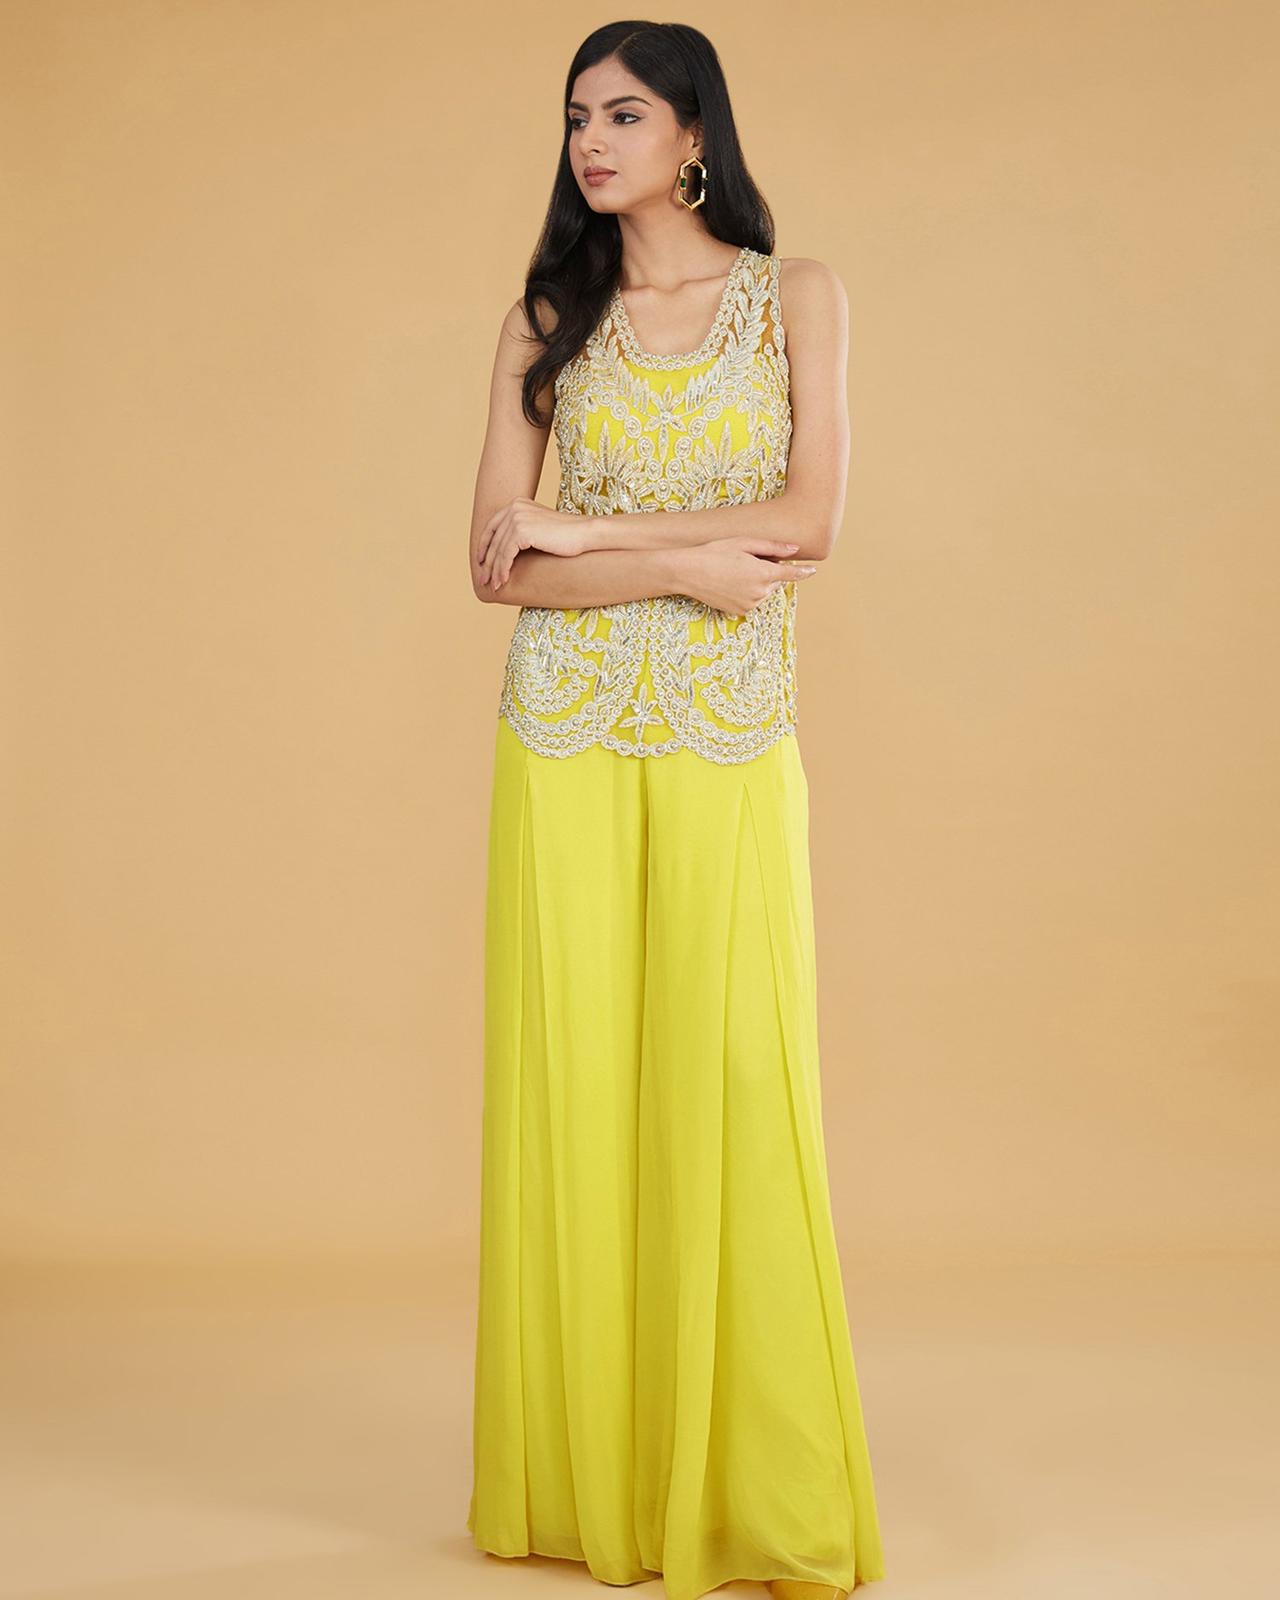 Tired of Looking for FUN Haldi Outfits for Brides?You've hit Jackpot!